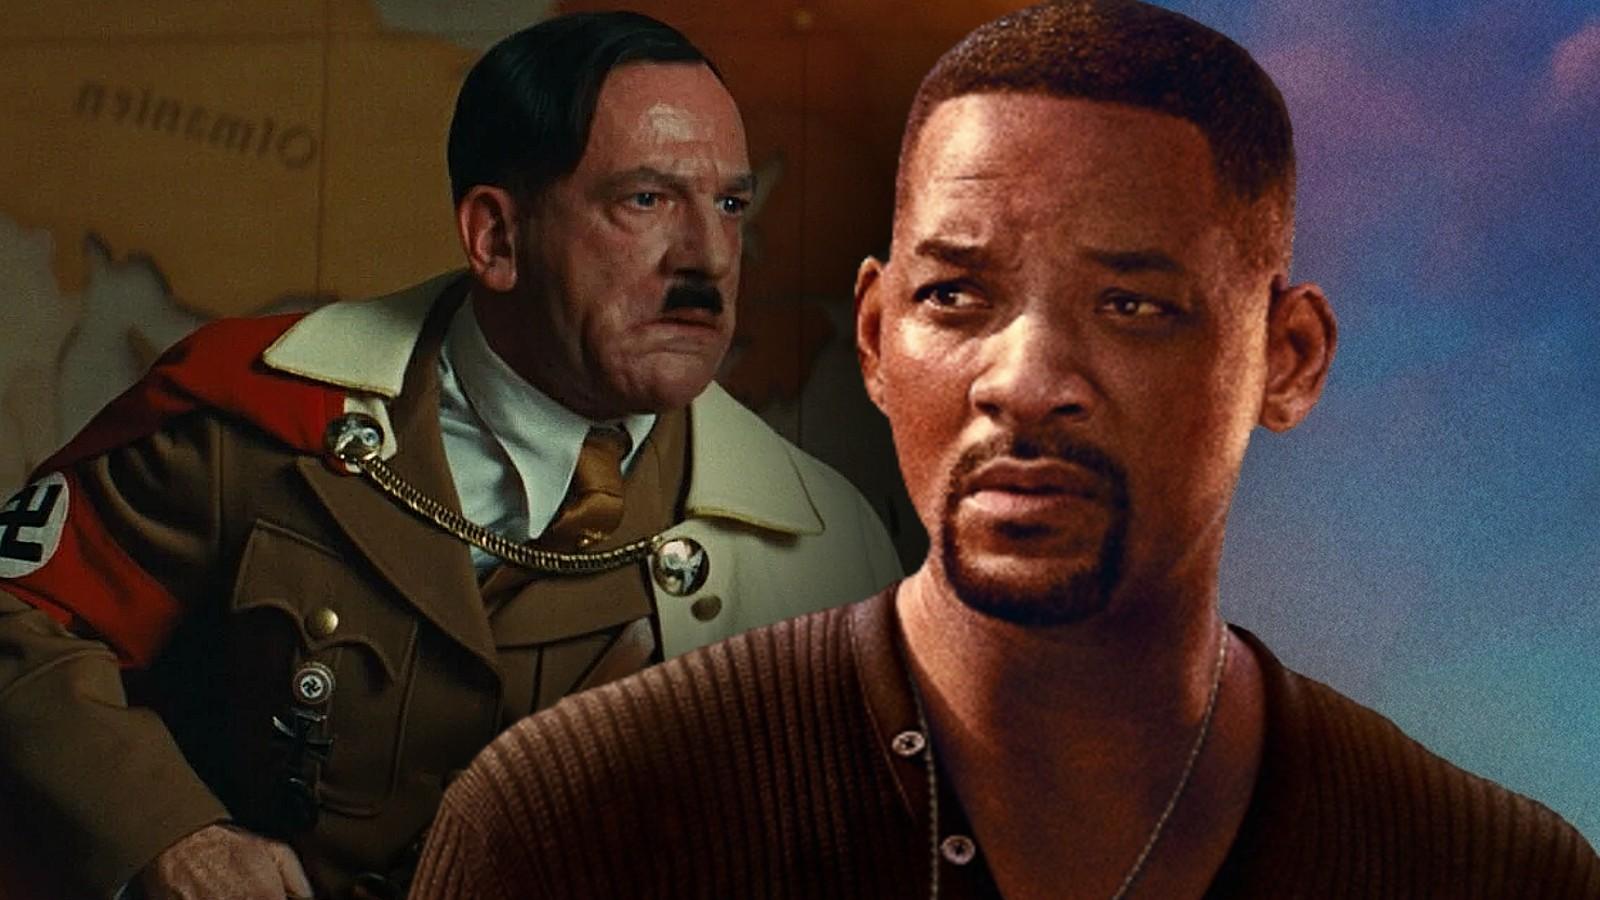 Adolf Hitler in Inglorious Basterds and Will Smith in Bad Boys 3